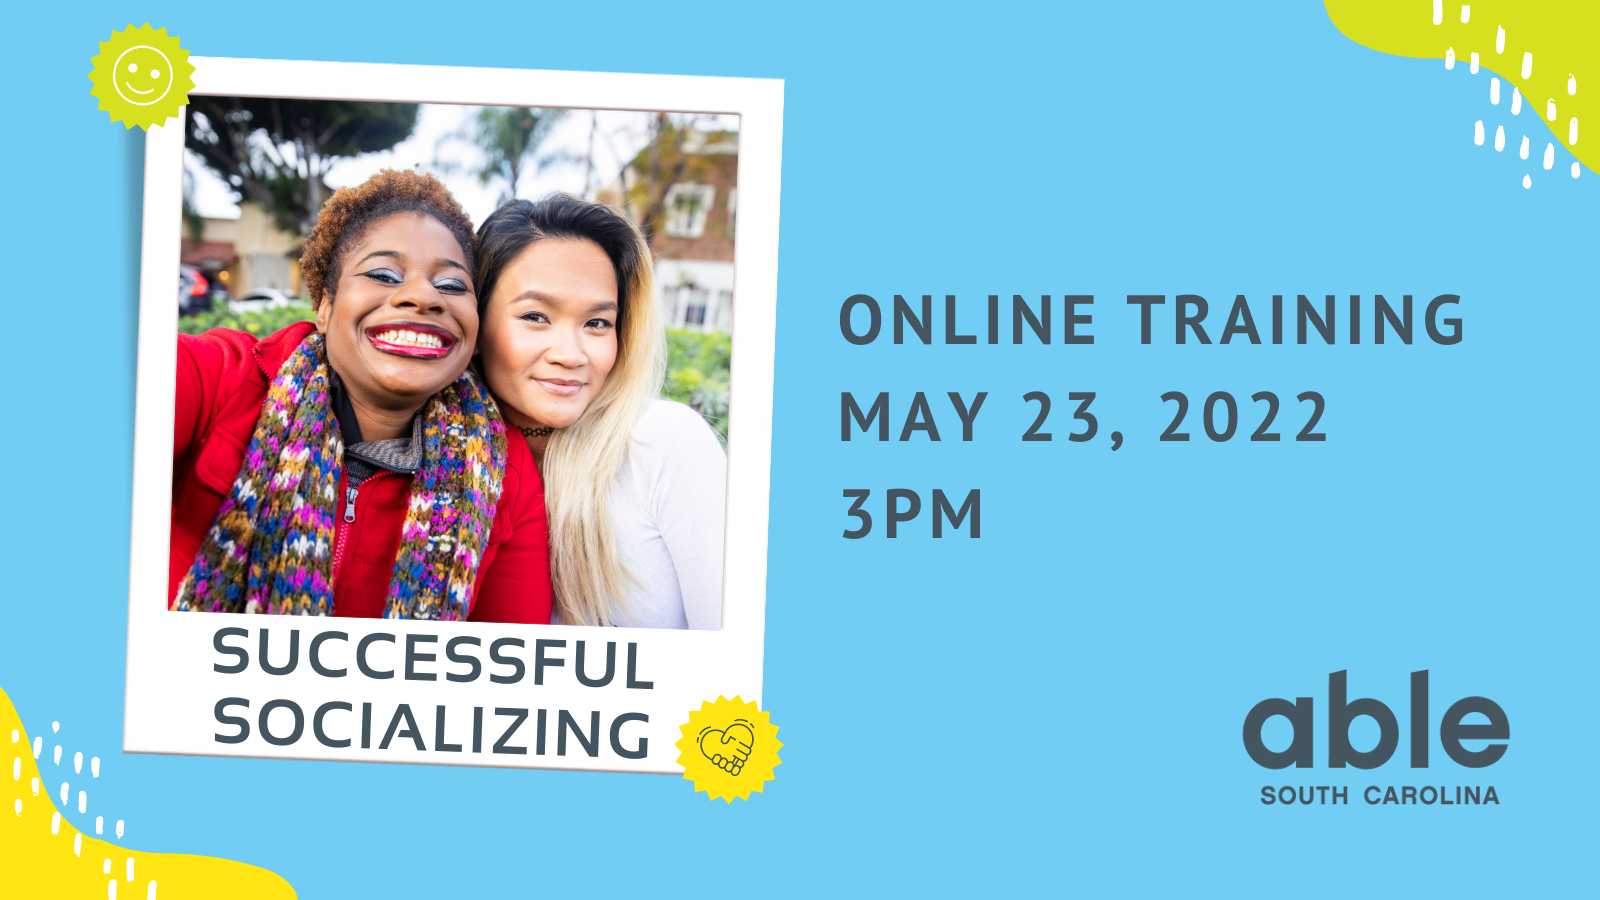 Blue background graphic with yellow, green, and white abstract shapes in the bottom left and top right corners. Gray text reads, ‘Successful Socializing, online training May 23, 2022, at 3pm,’ followed by Able SC logo in the bottom right corner. Photo in a polaroid style frame with green and yellow stickers is featured to the left. Photo is of two people taking a selfie. One is a Black woman with short natural hair and bright red lipstick smiling widely. The Other person is a woman of East Asian descent, with black a gold dyed long hair, smiling softly.